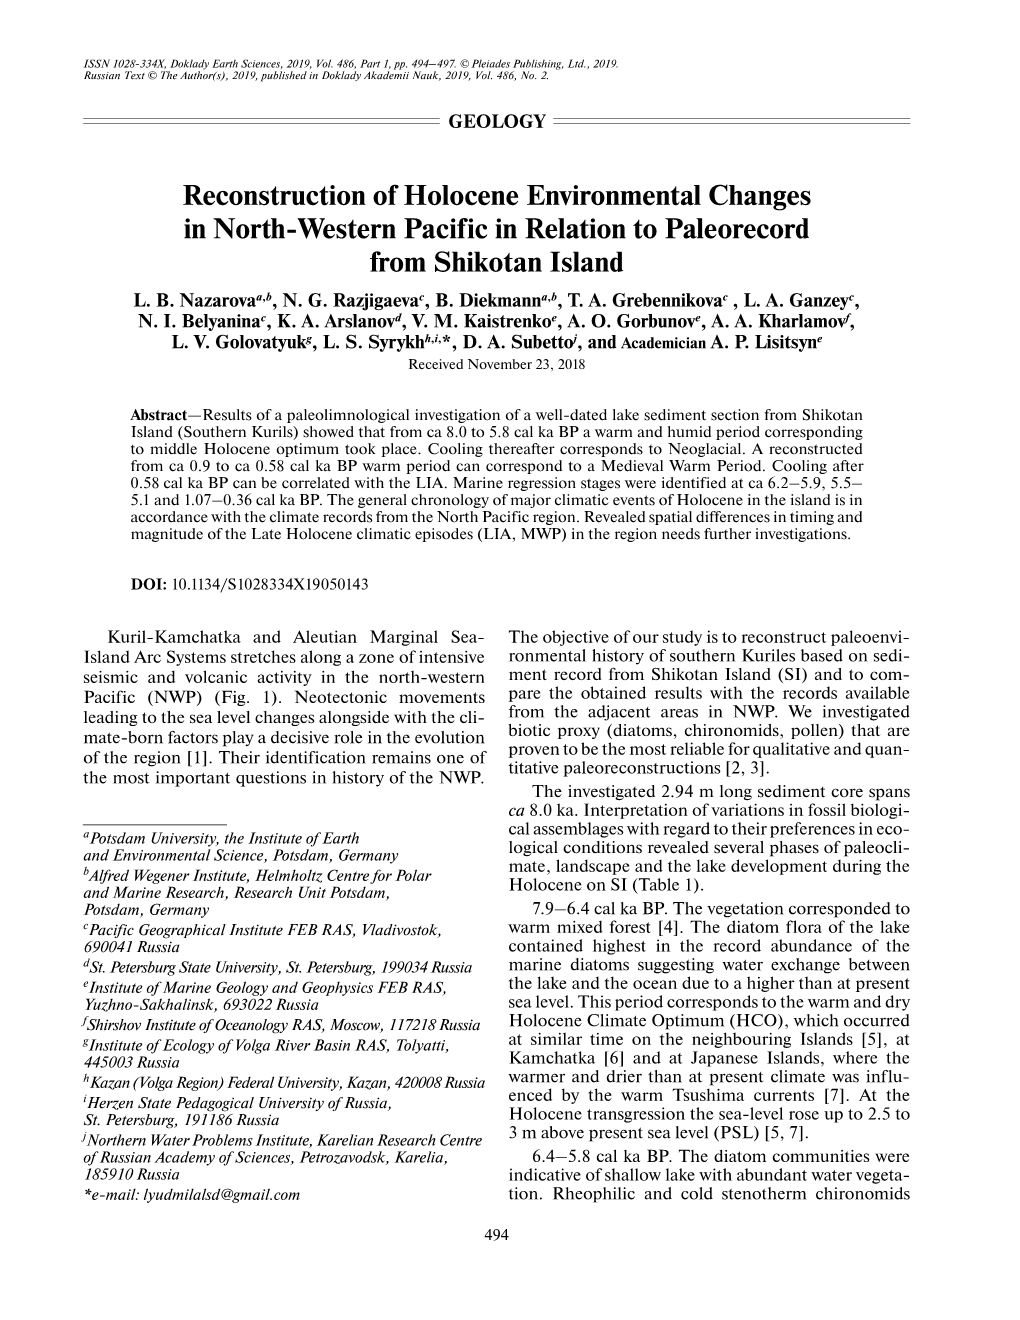 Reconstruction of Holocene Environmental Changes in North-Western Pacific in Relation to Paleorecord from Shikotan Island L